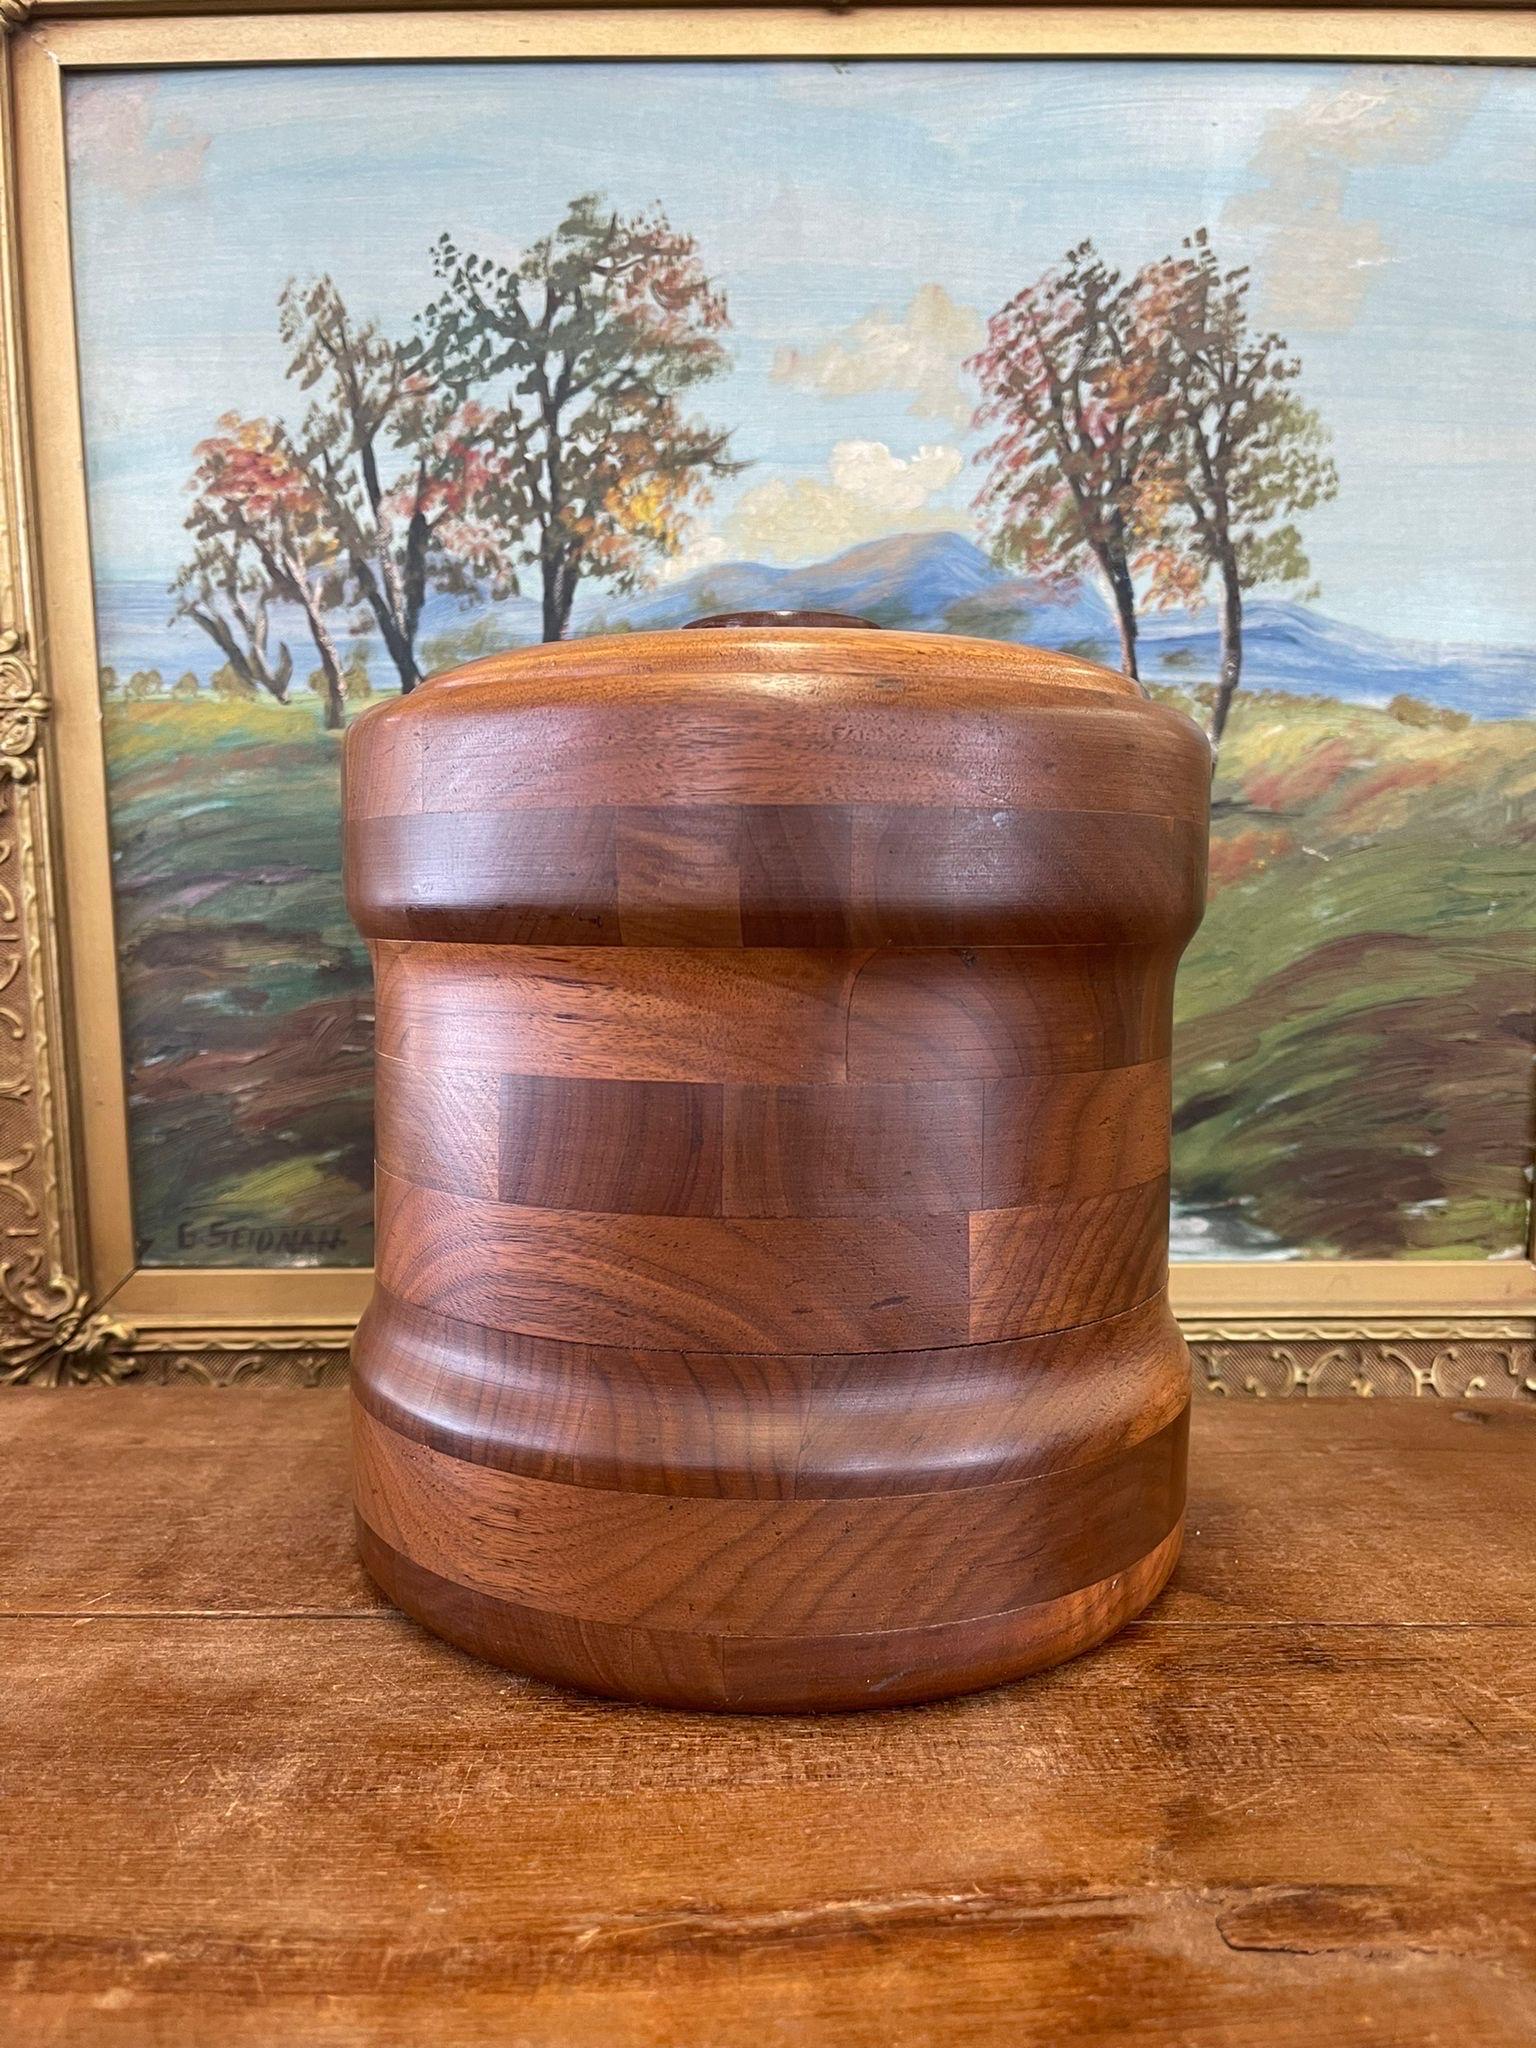 Circa 1960s. Solid Walnut lid and casing, as stated on the markers mark on the bottom. Contrasting wood grains cover the sides. Turned wood Handle. Vintage condition consistent with age as Pictured.

Dimensions. 8 Diameter ; 9 H